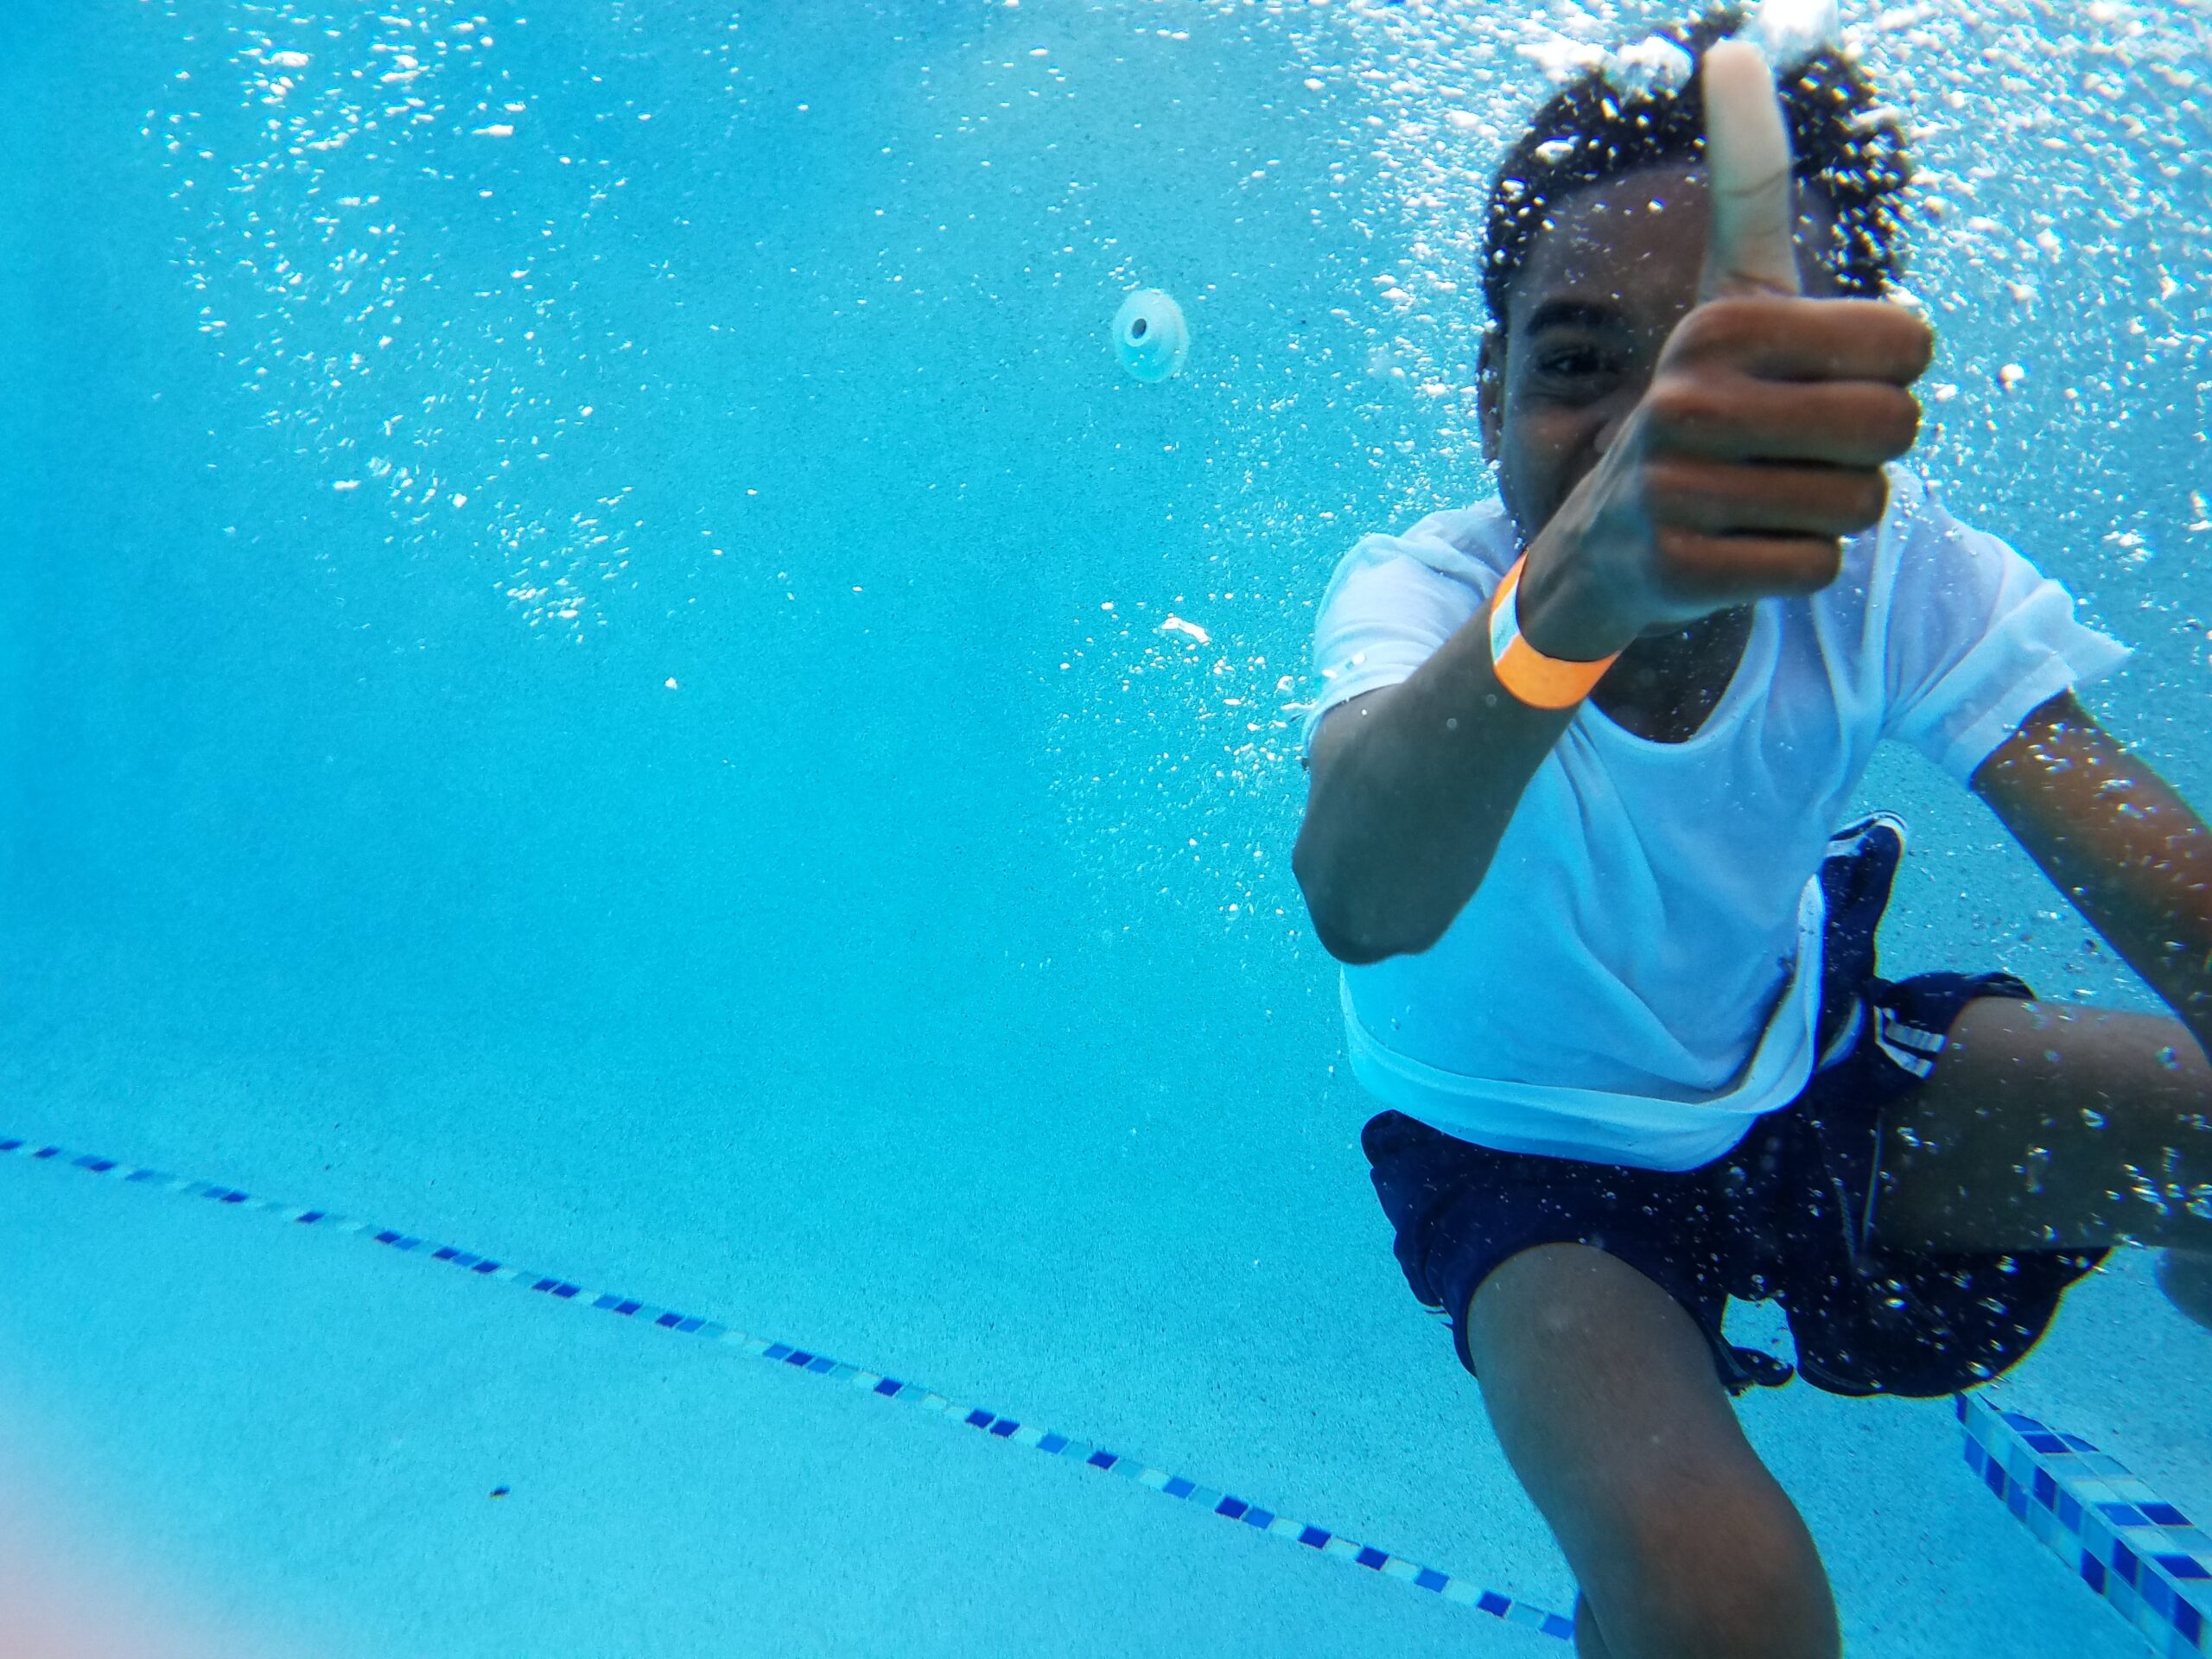 black kid swimming underwater giving thumbs up for swim safety